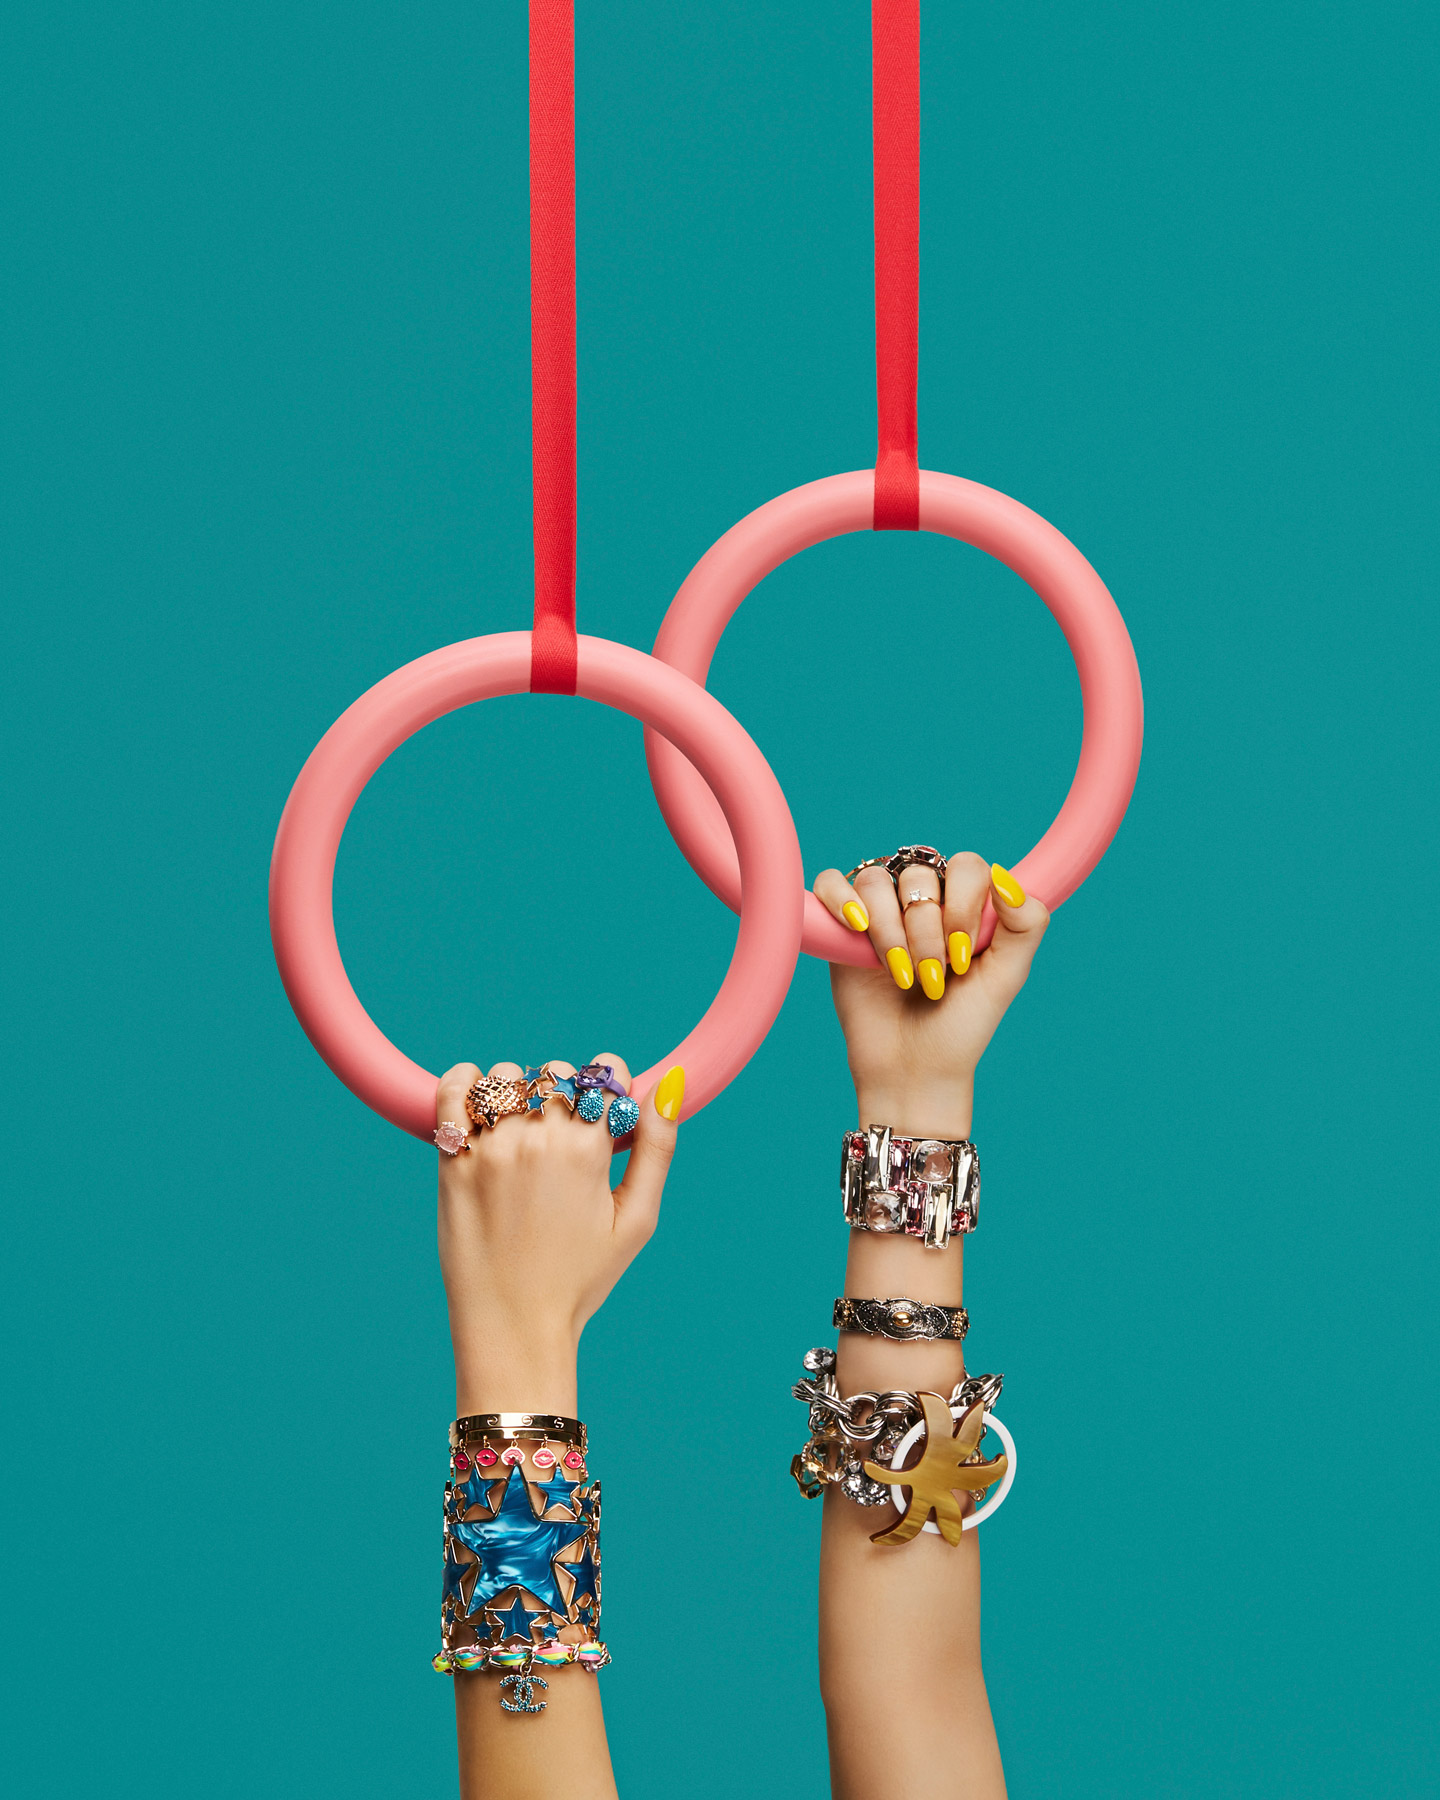 glorious aleksandra kingo lets get physical woman holding rings with rings